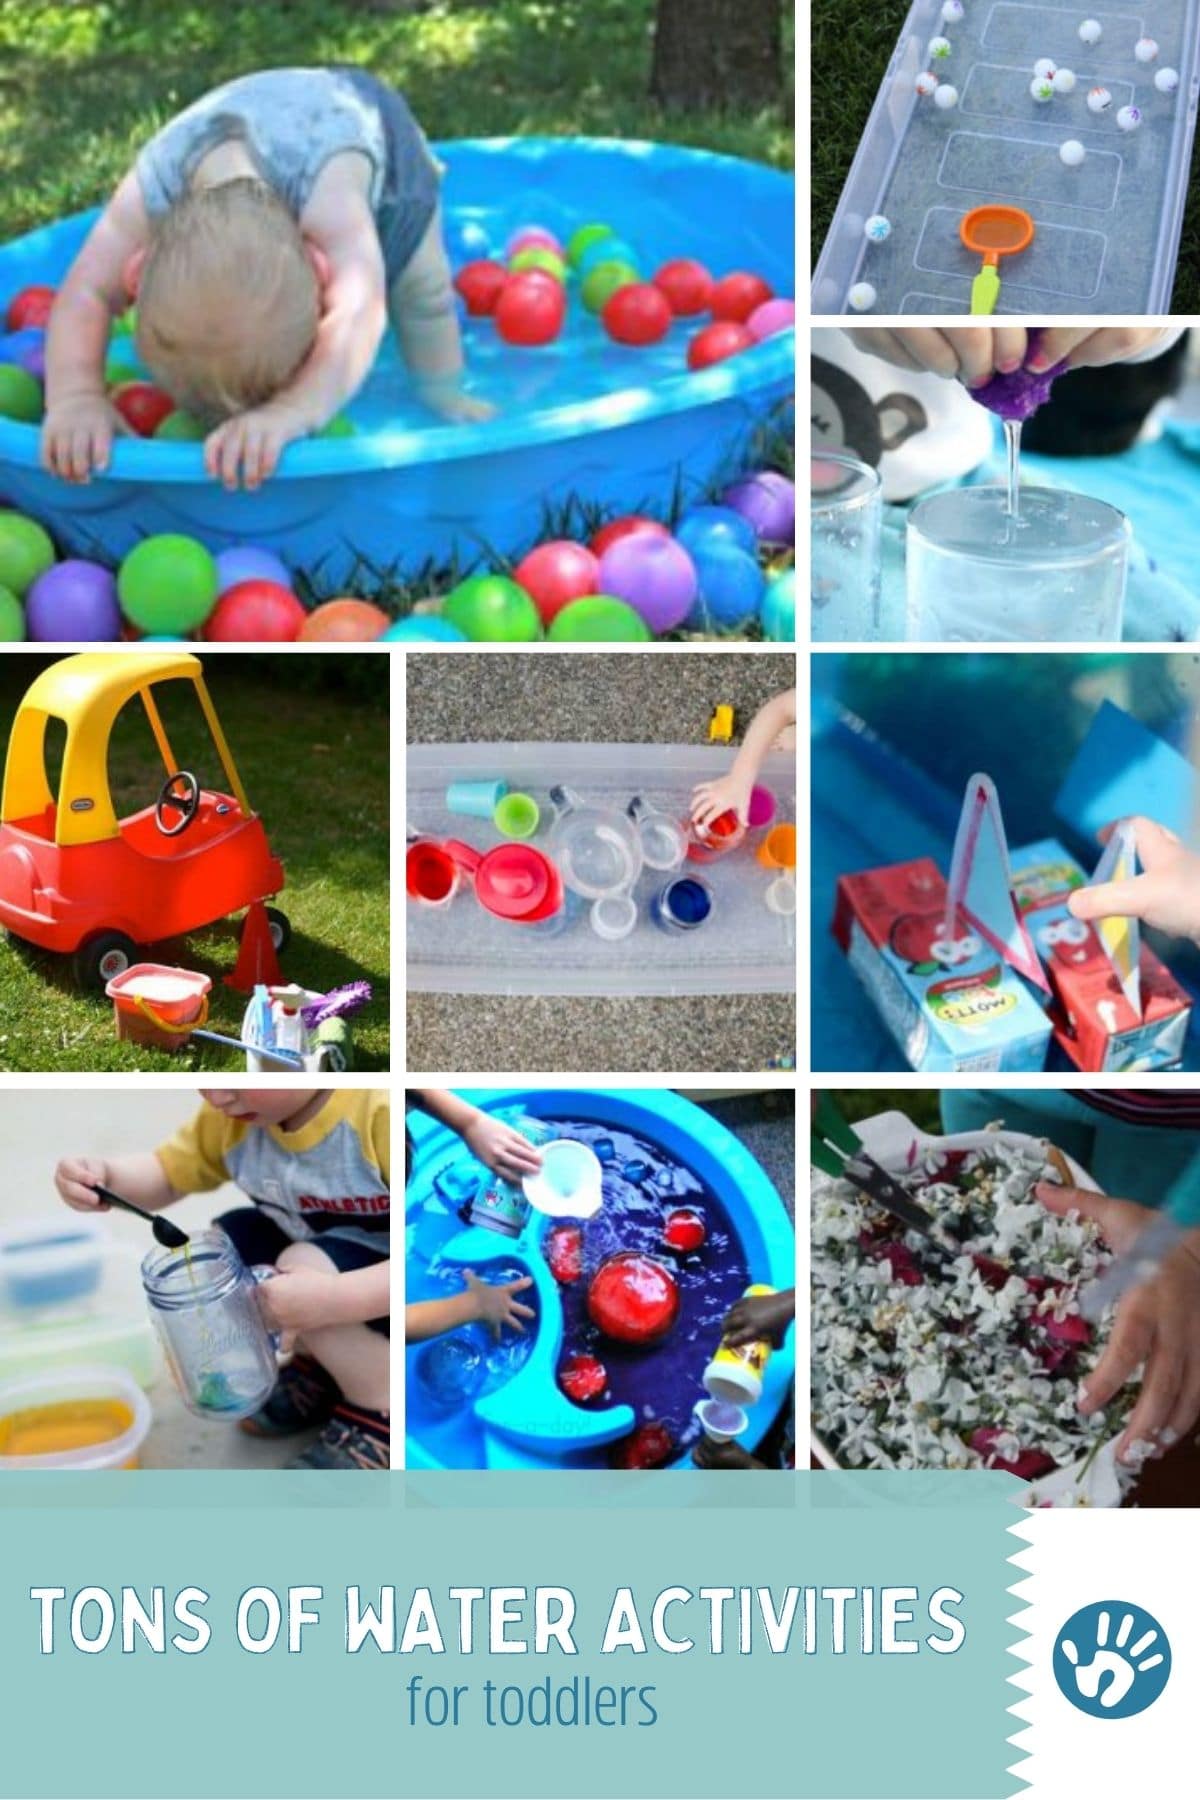 Small Aquatic Play Set for Kids, Cool Playset with Action Figure, Floa ·  Art Creativity